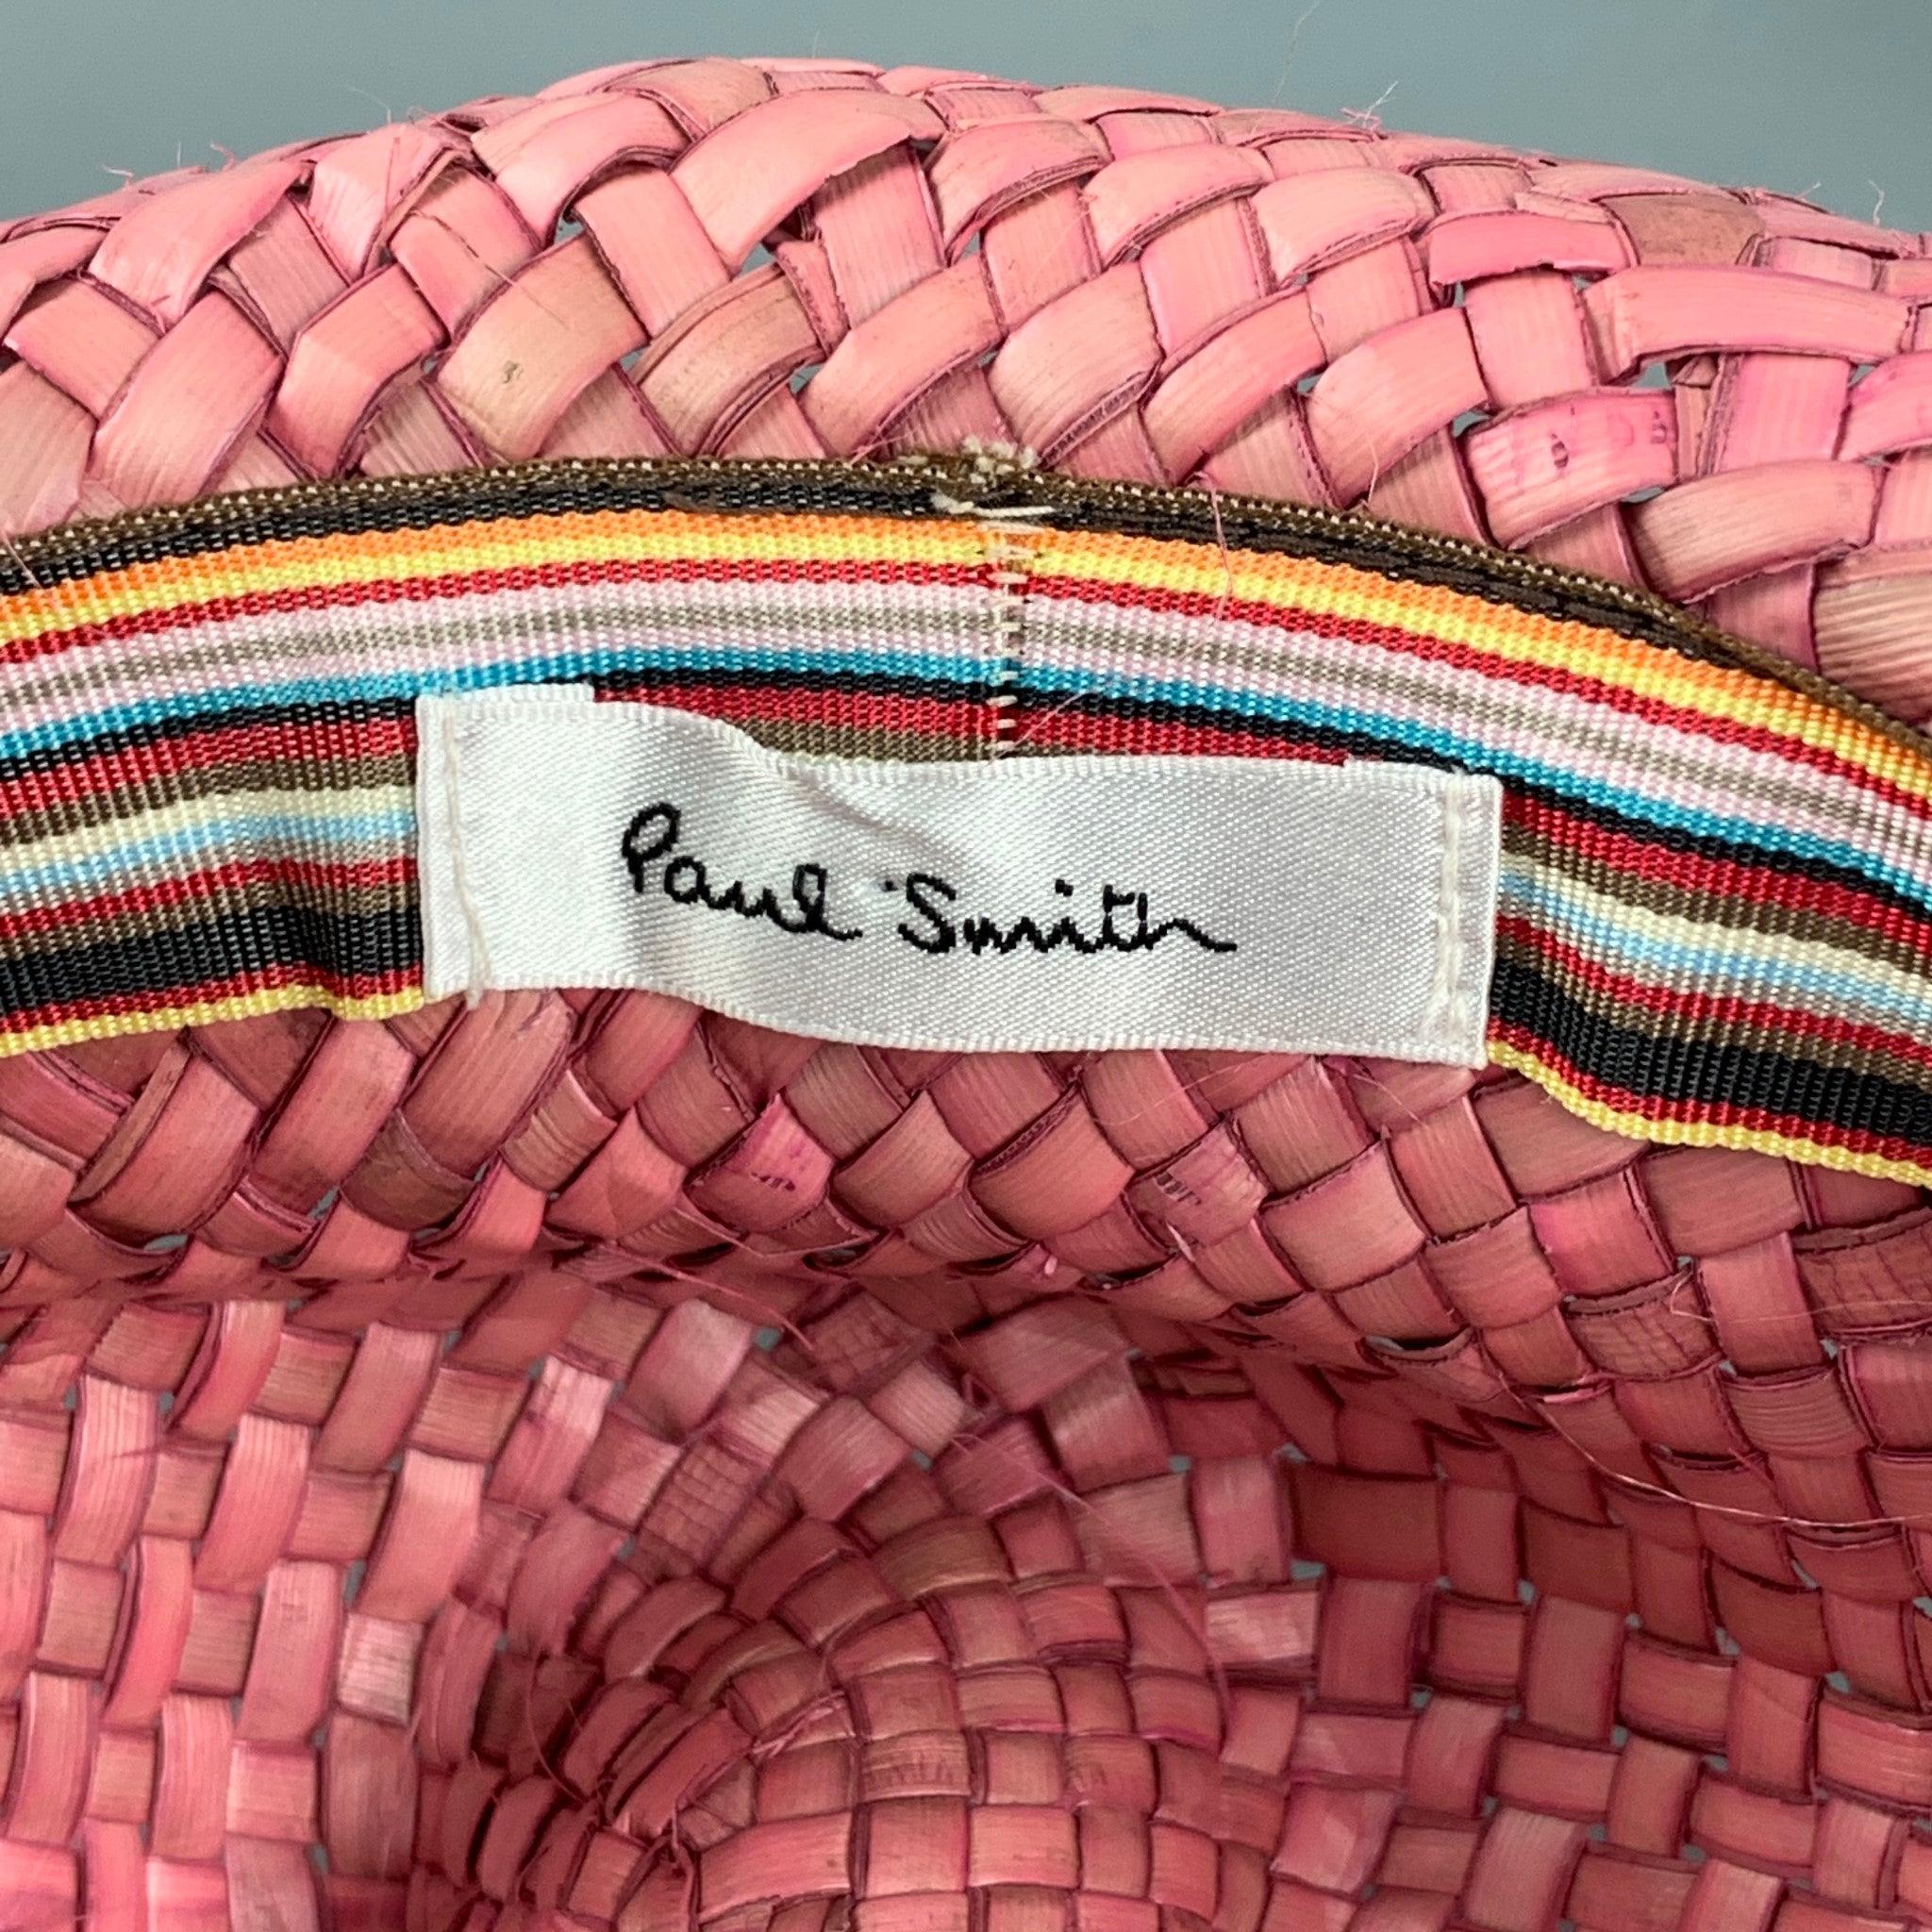 PAUL SMITH Pink Woven Straw Floral Band Hat For Sale 1